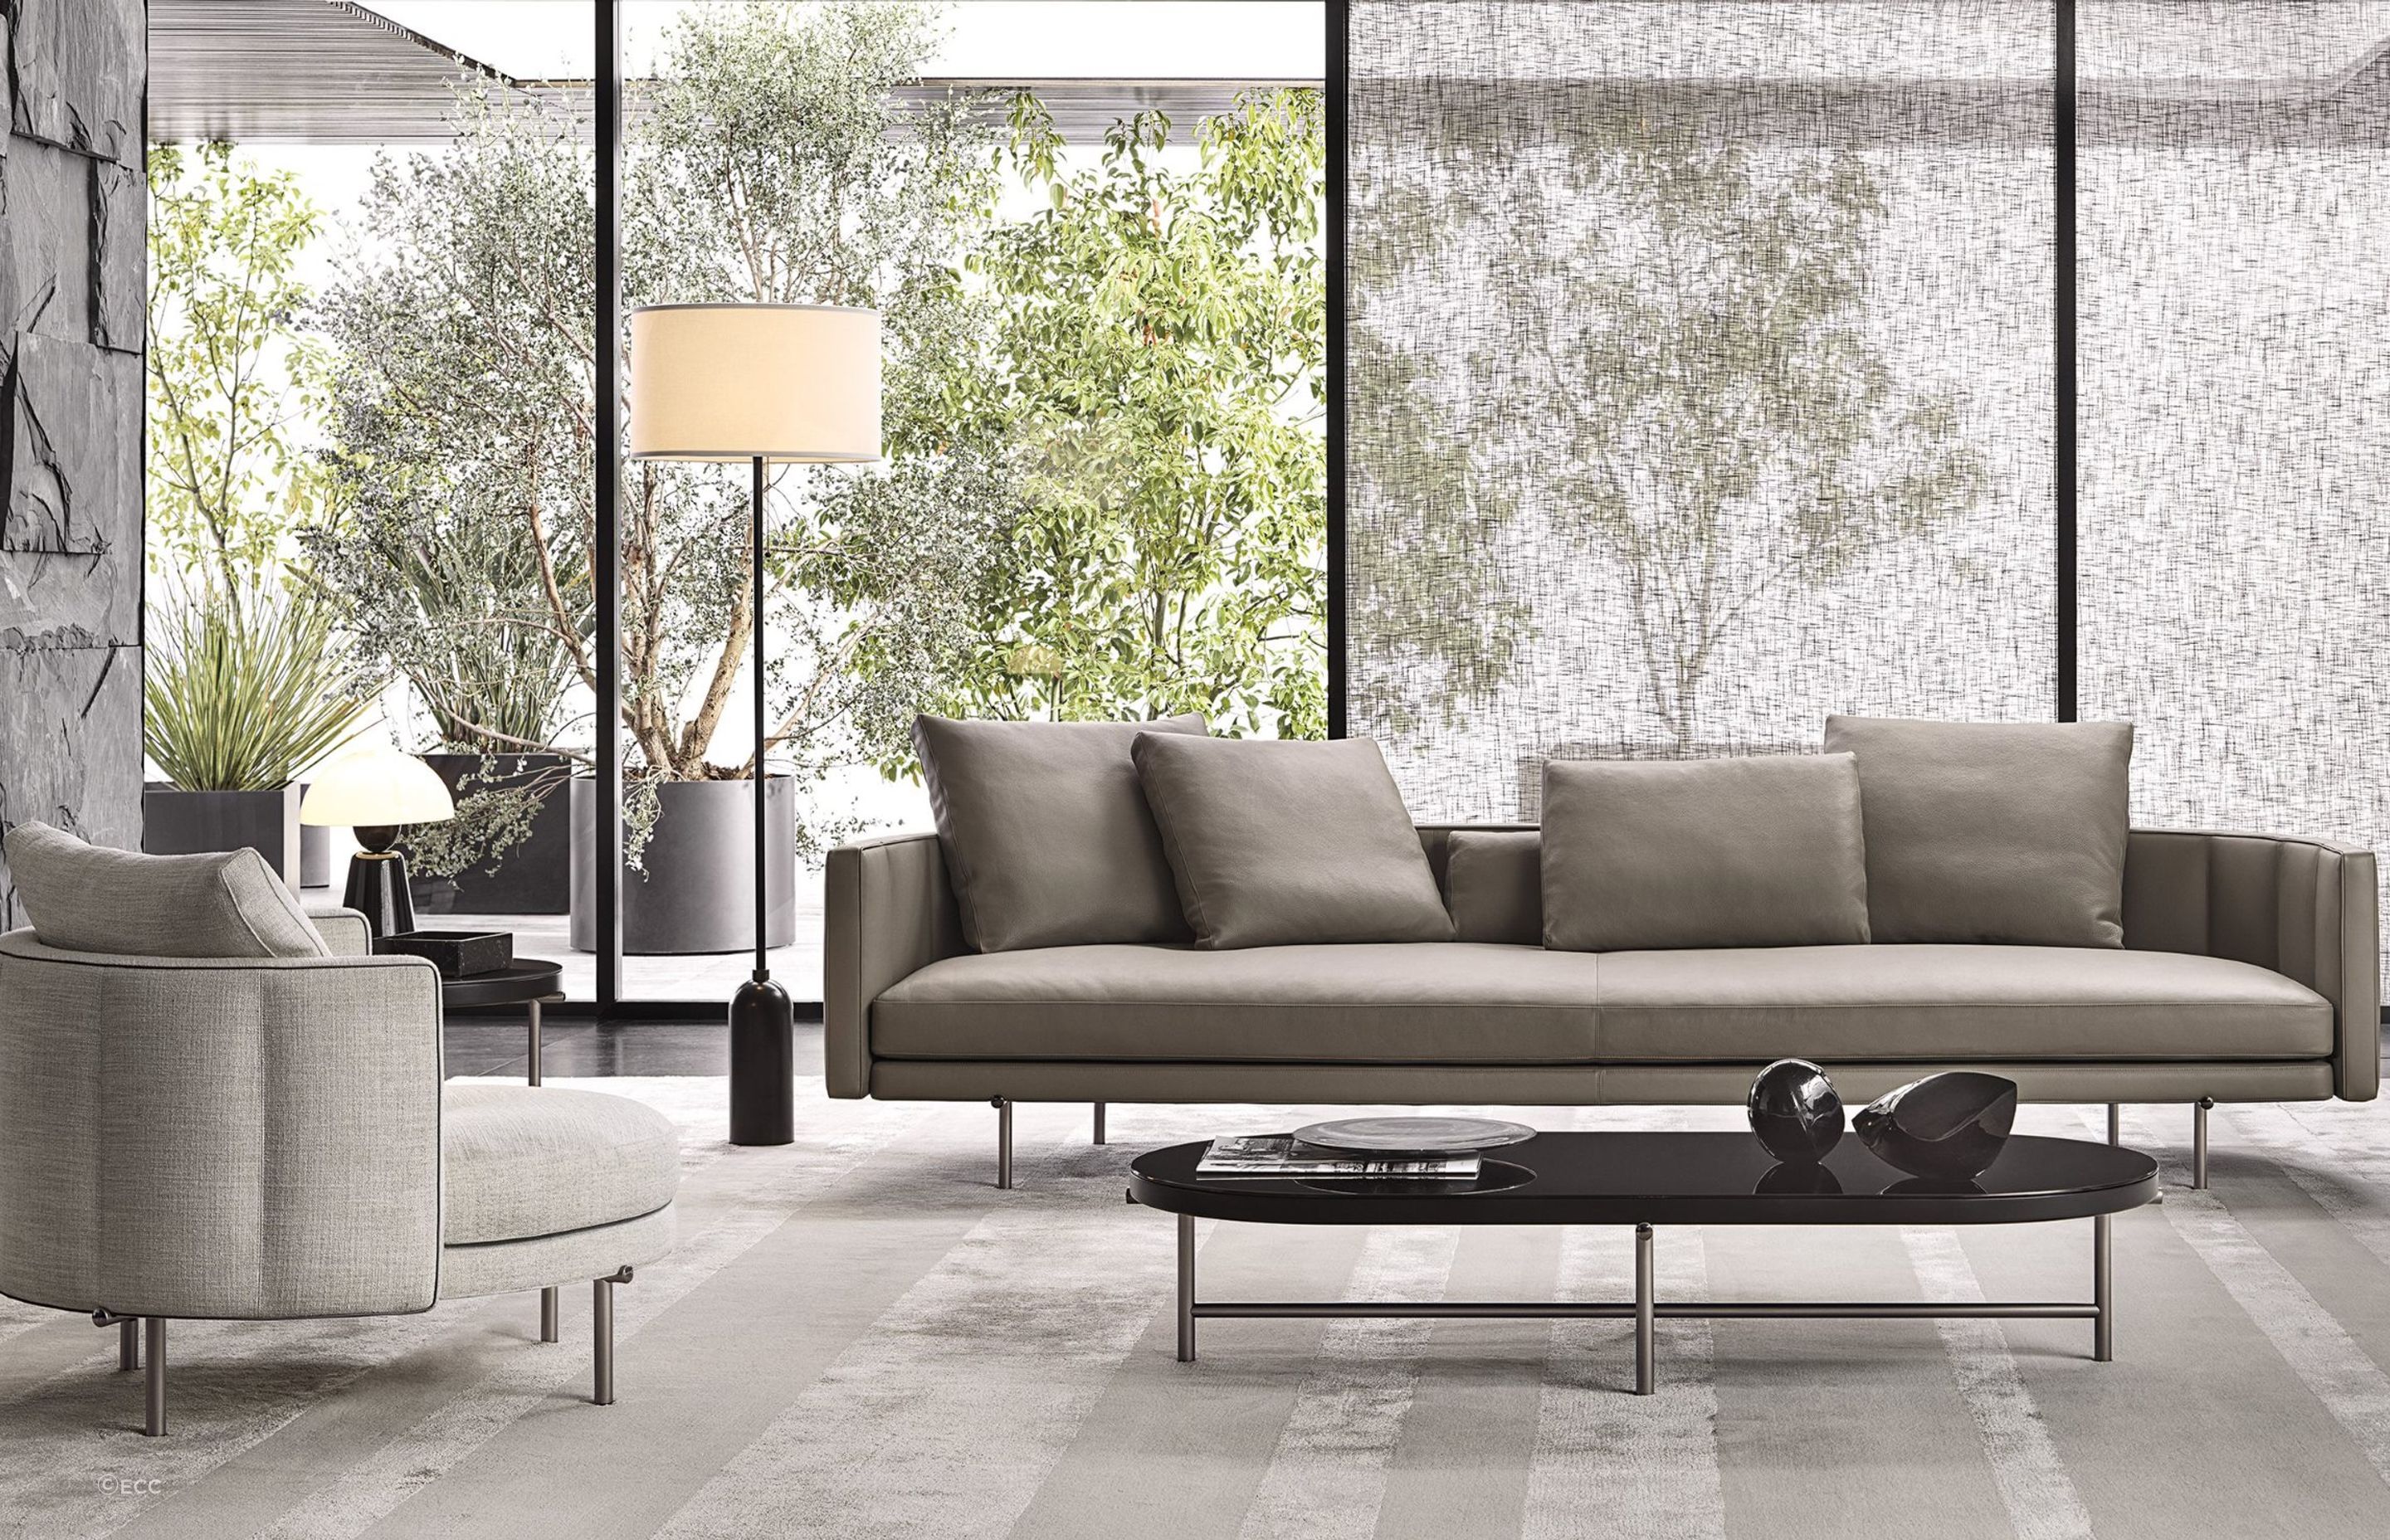 A sofa, like this exquisite Torii Sofa by Nendo For Minotti, is one of the essential furnishings every home must have.